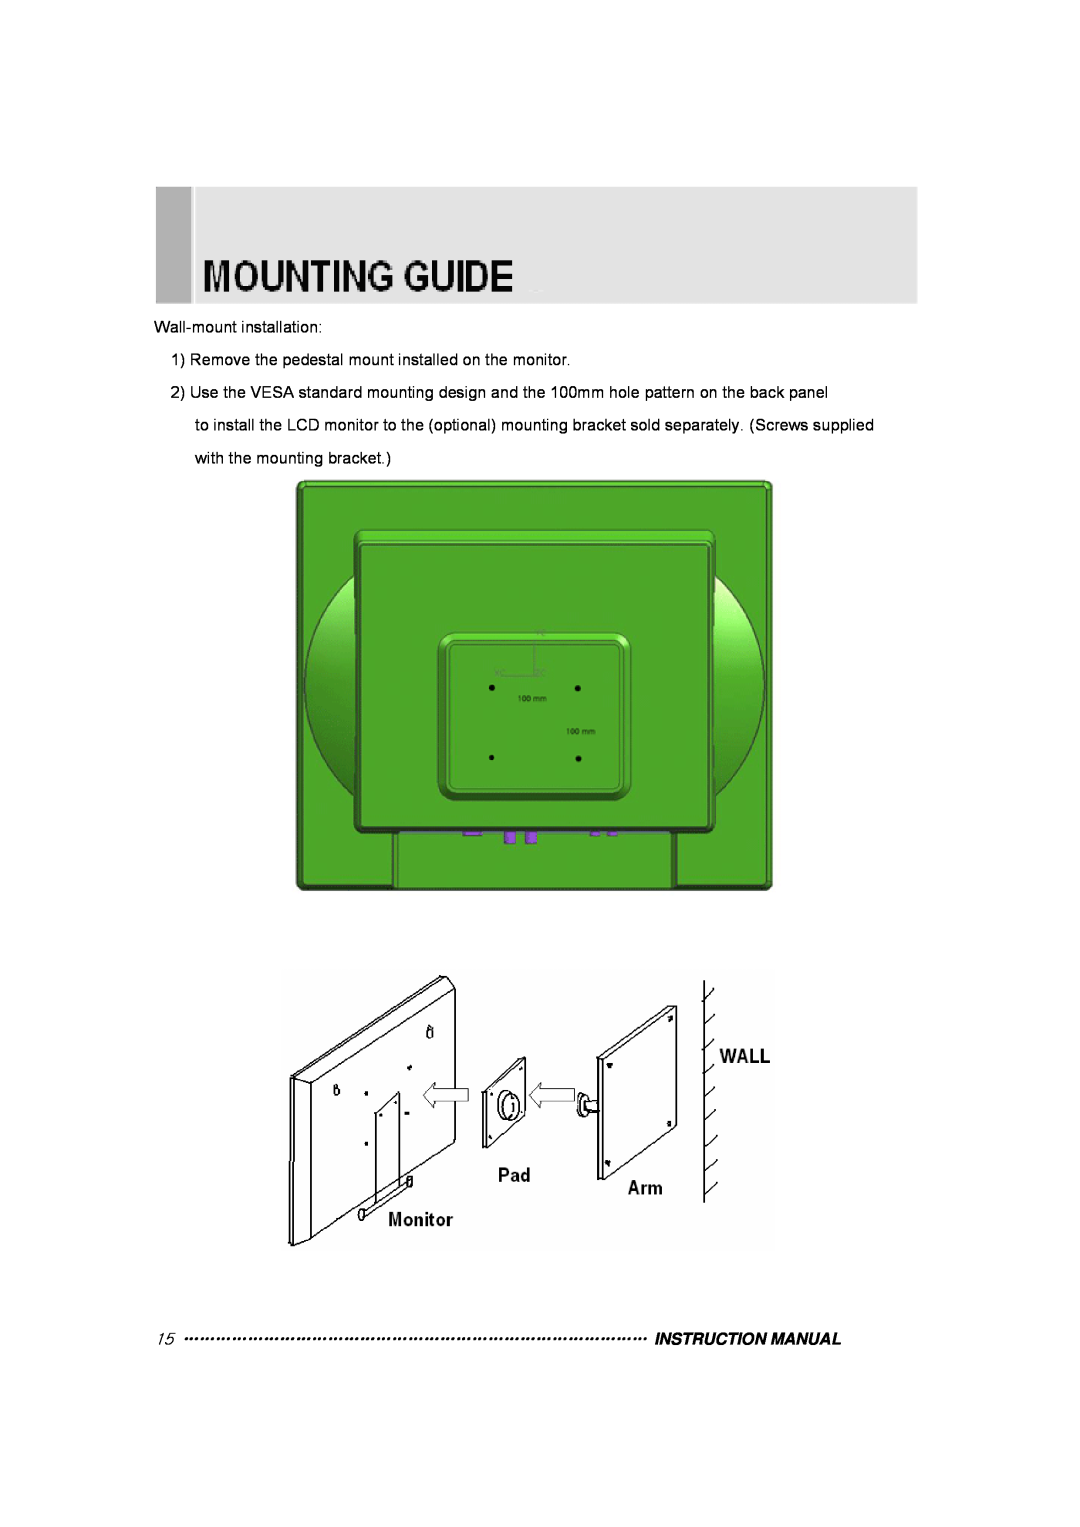 TOA Electronics 15RTV instruction manual Wall-mount installation, Remove the pedestal mount installed on the monitor 